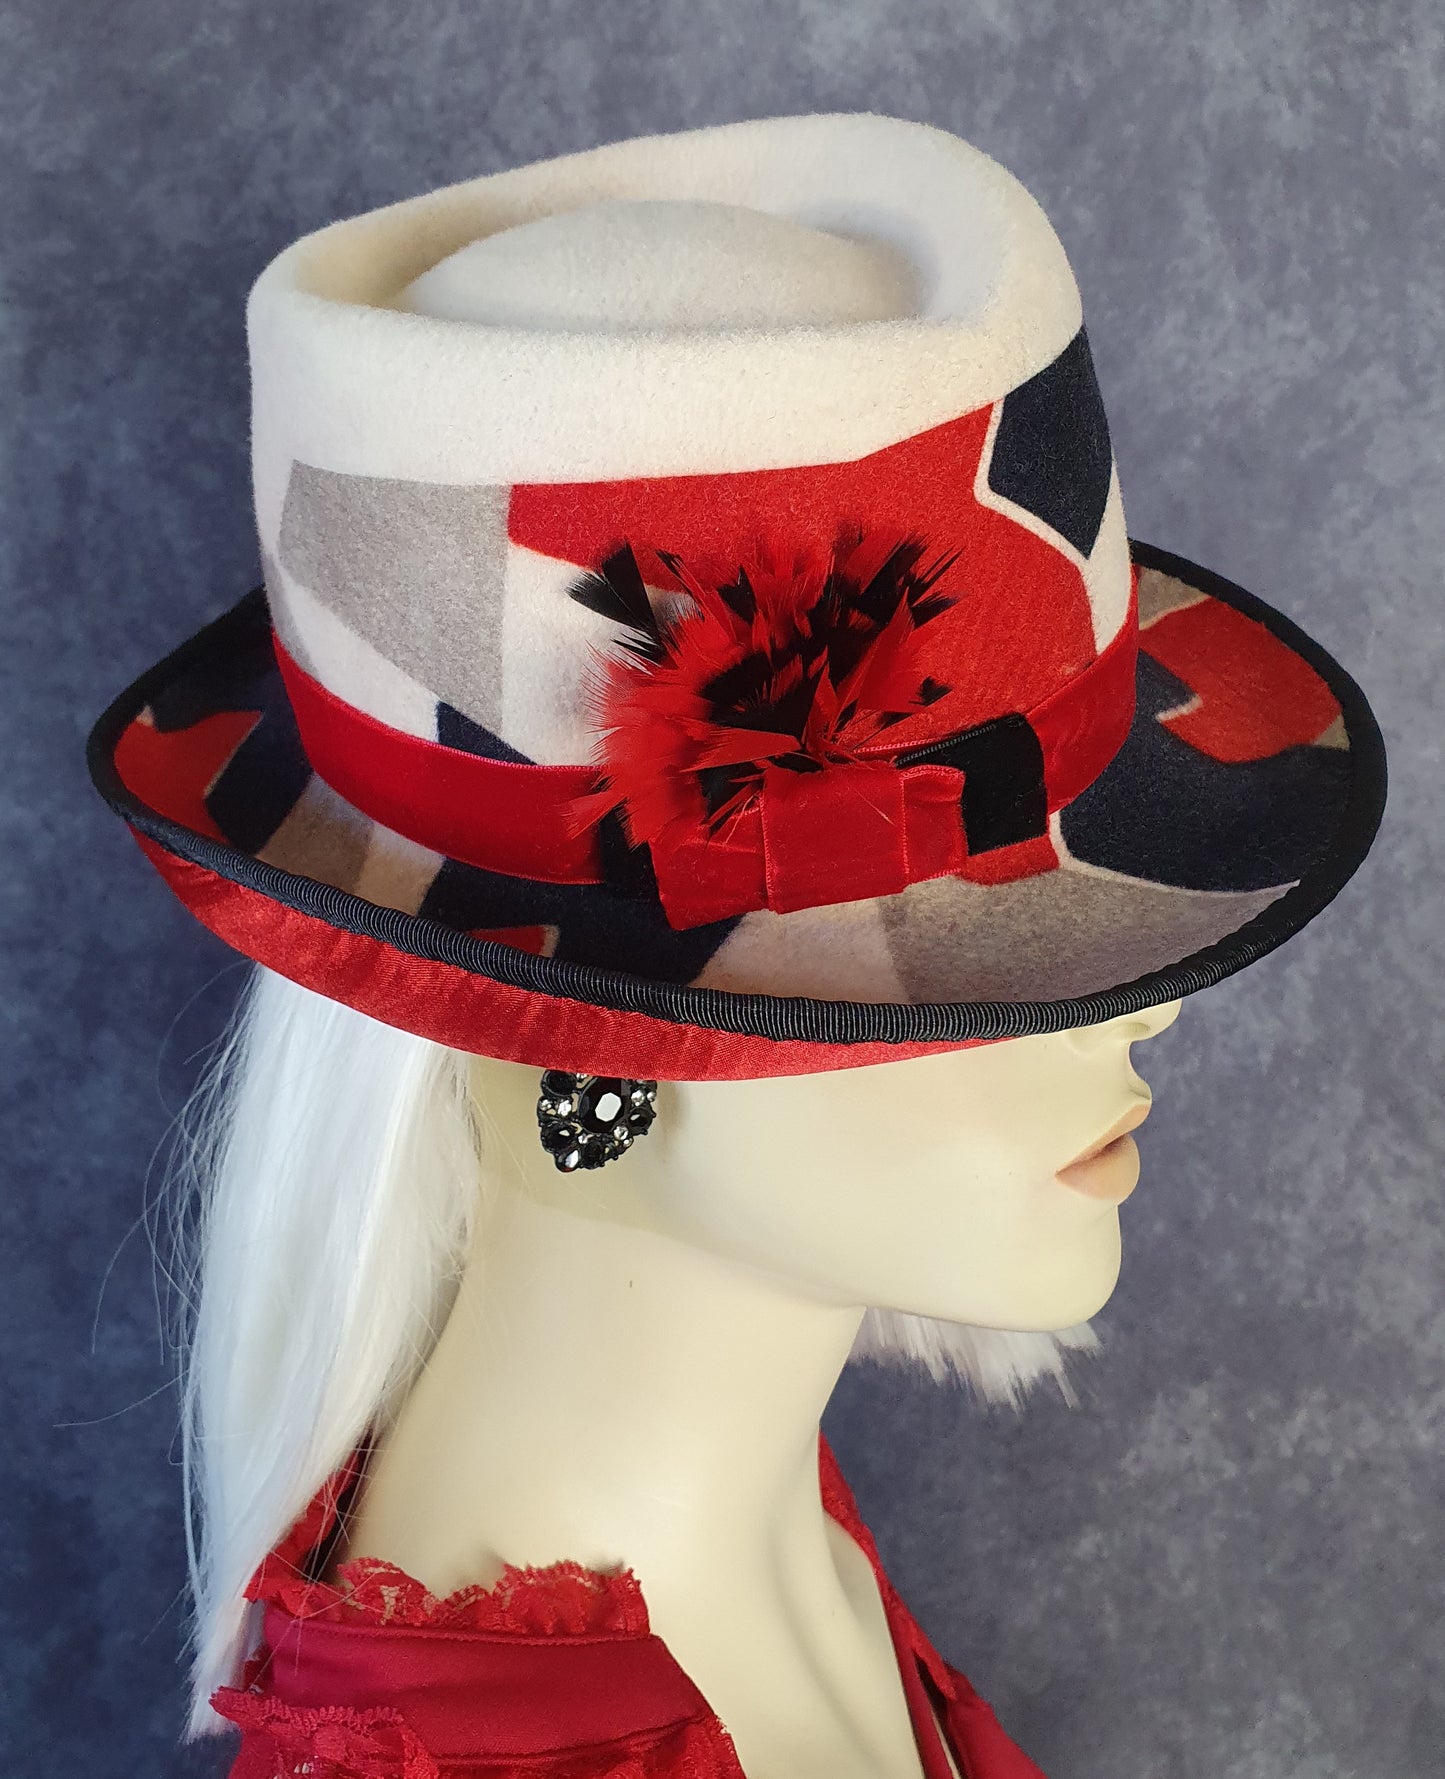 Handmade felt hat with turkey feather four-color mosaic hat, feminine headdress - perfect for special occasions